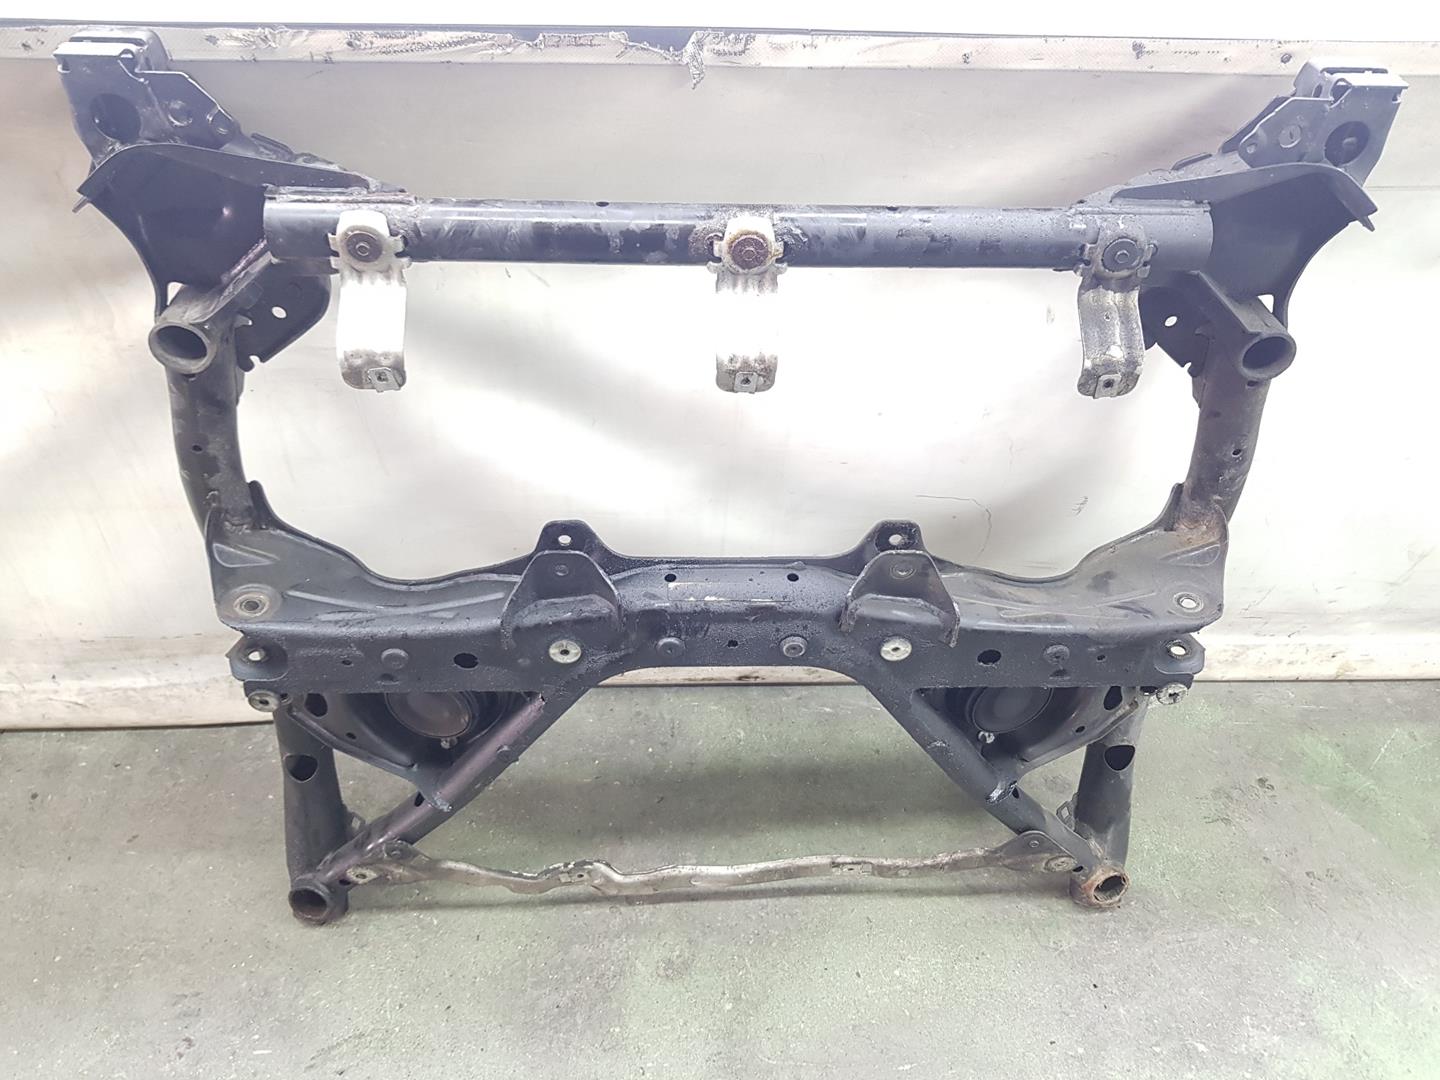 BMW 3 Series F30/F31 (2011-2020) Front Suspension Subframe 6872118, 31106872118 23799870